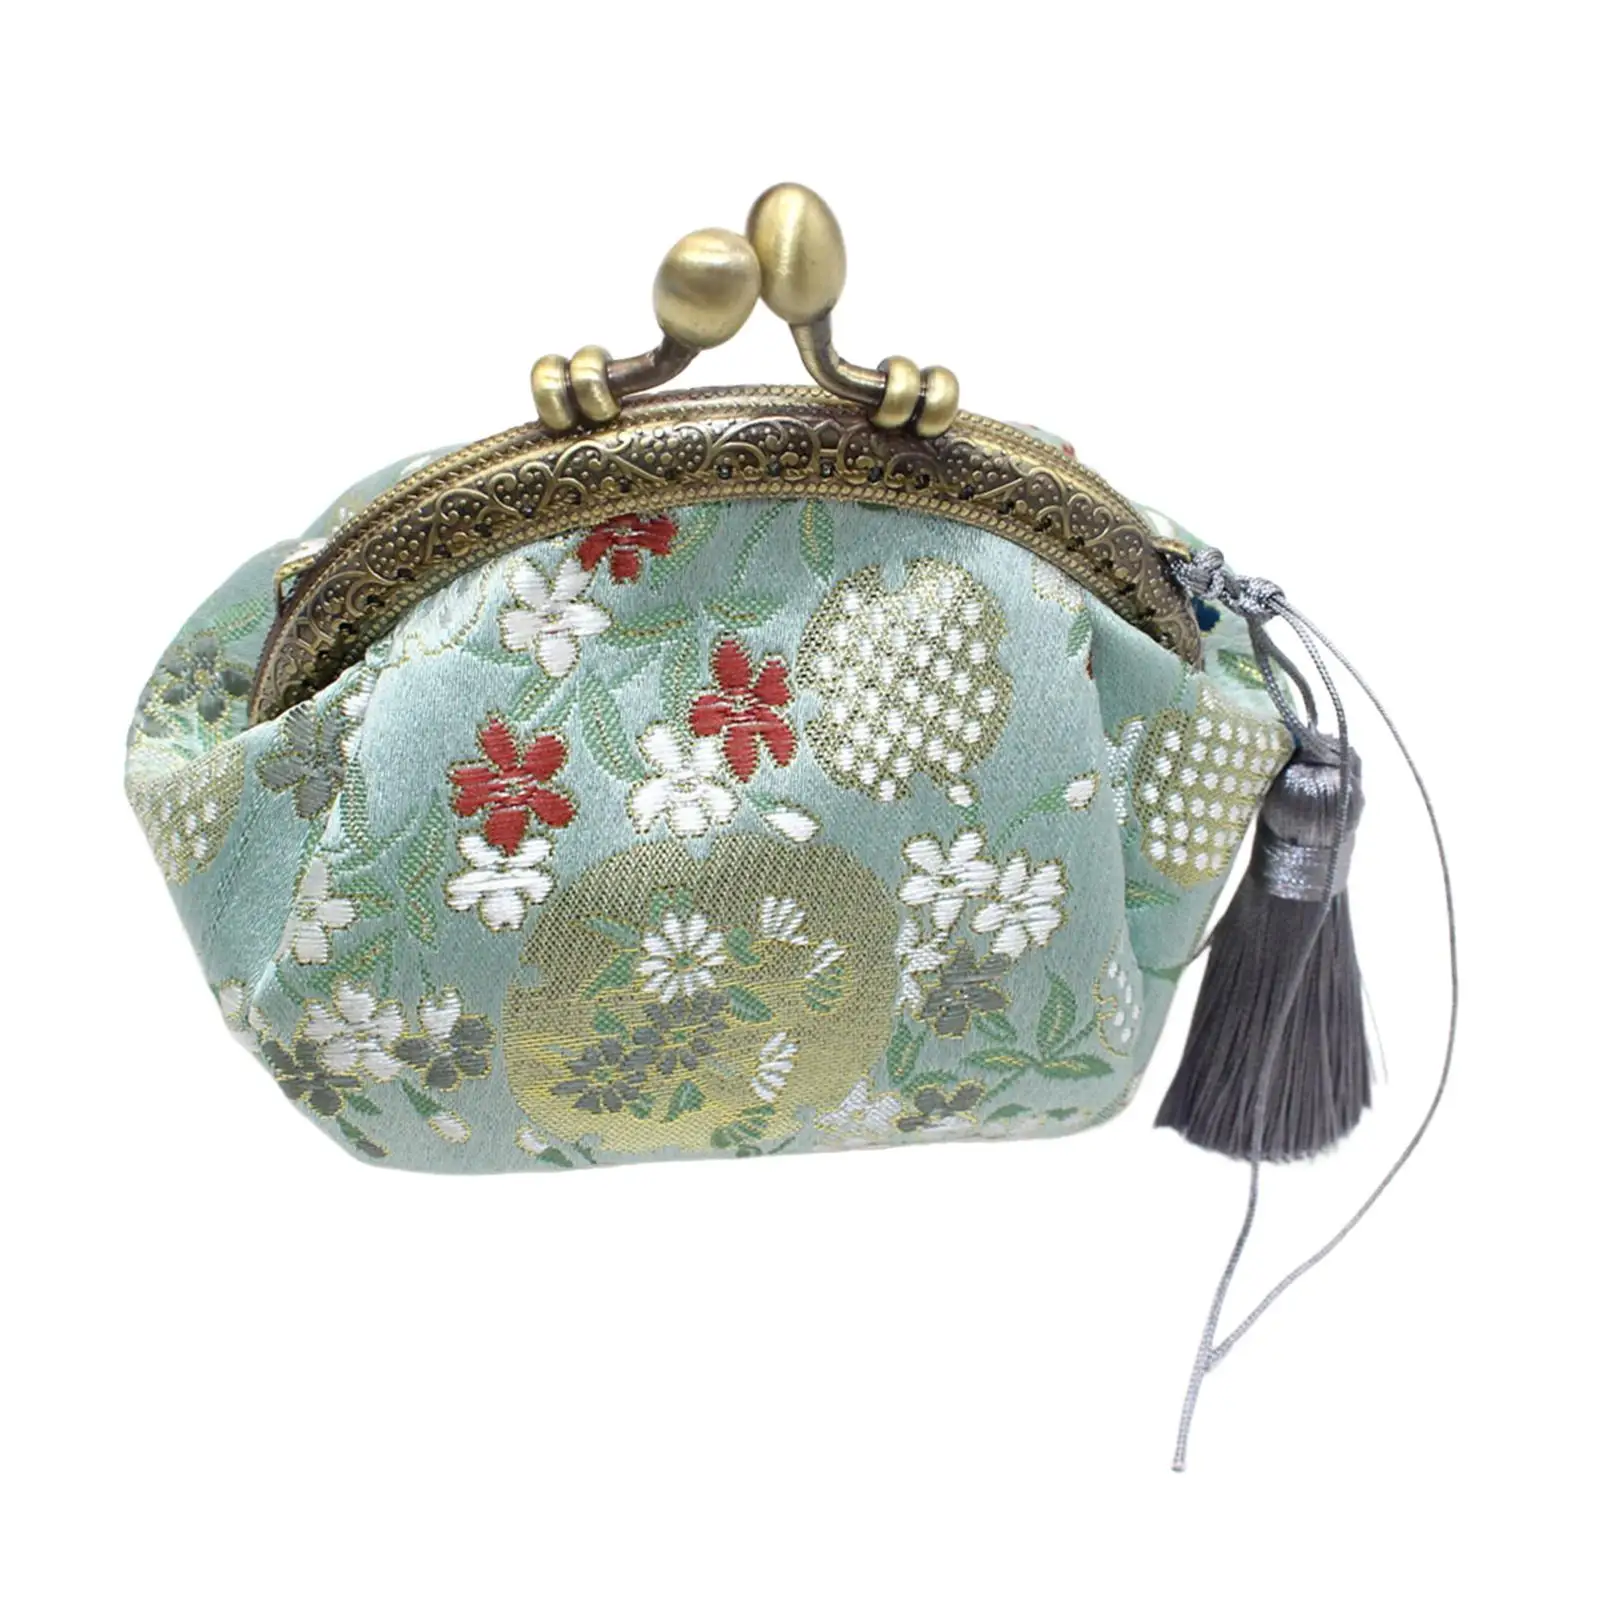 Small Coin Purse Kiss Lock Floral Change Holder Fashion Exquisite Wallet Handmade Embossed for Women Trinkets Storage Cash Gift